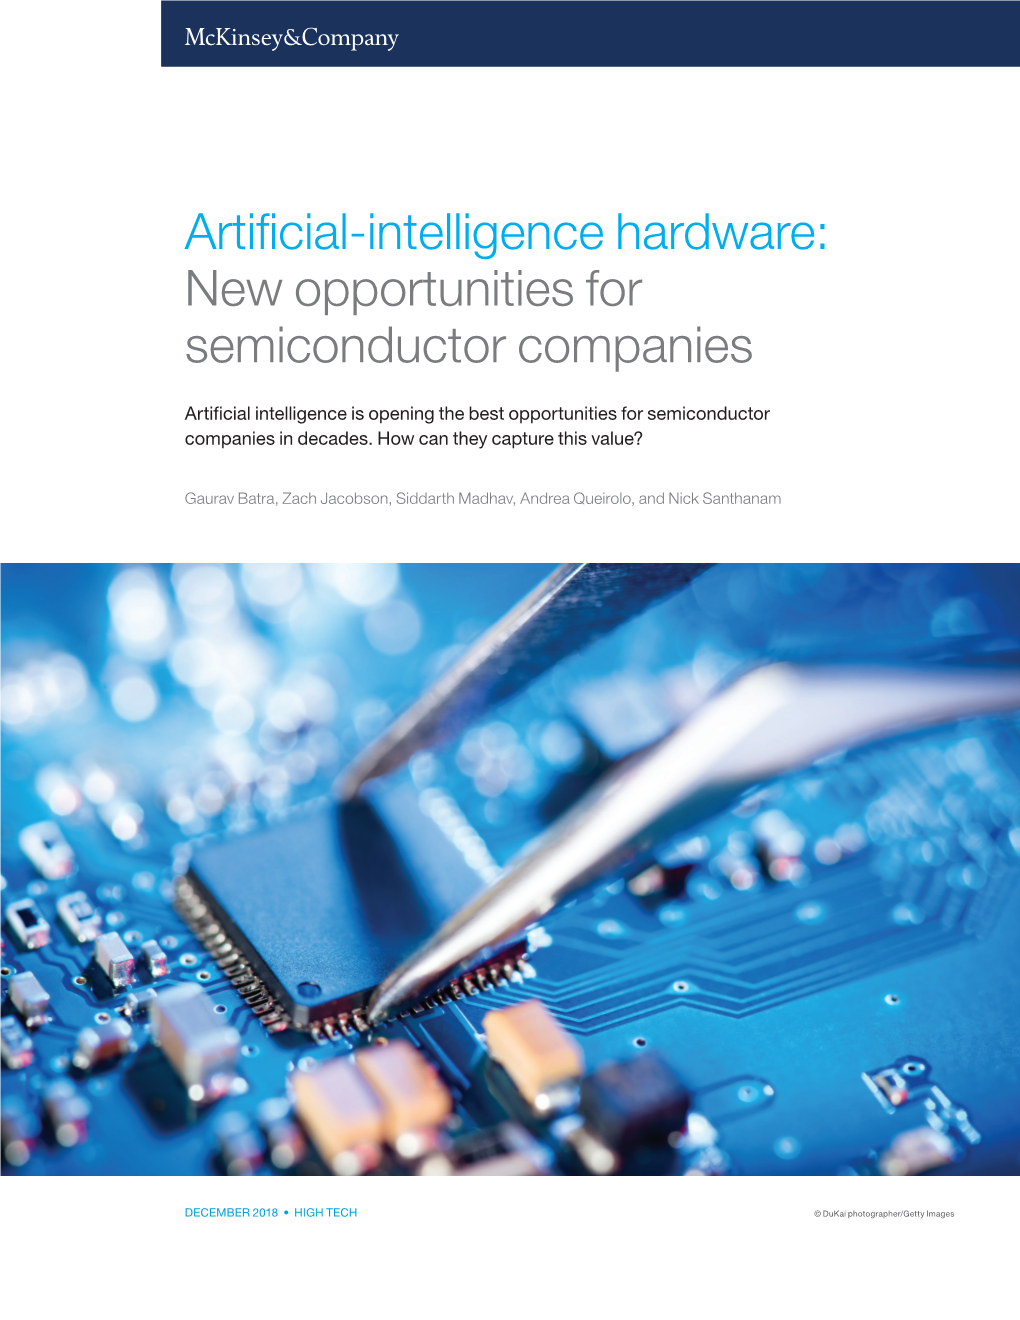 Artificial-Intelligence Hardware: New Opportunities for Semiconductor Companies